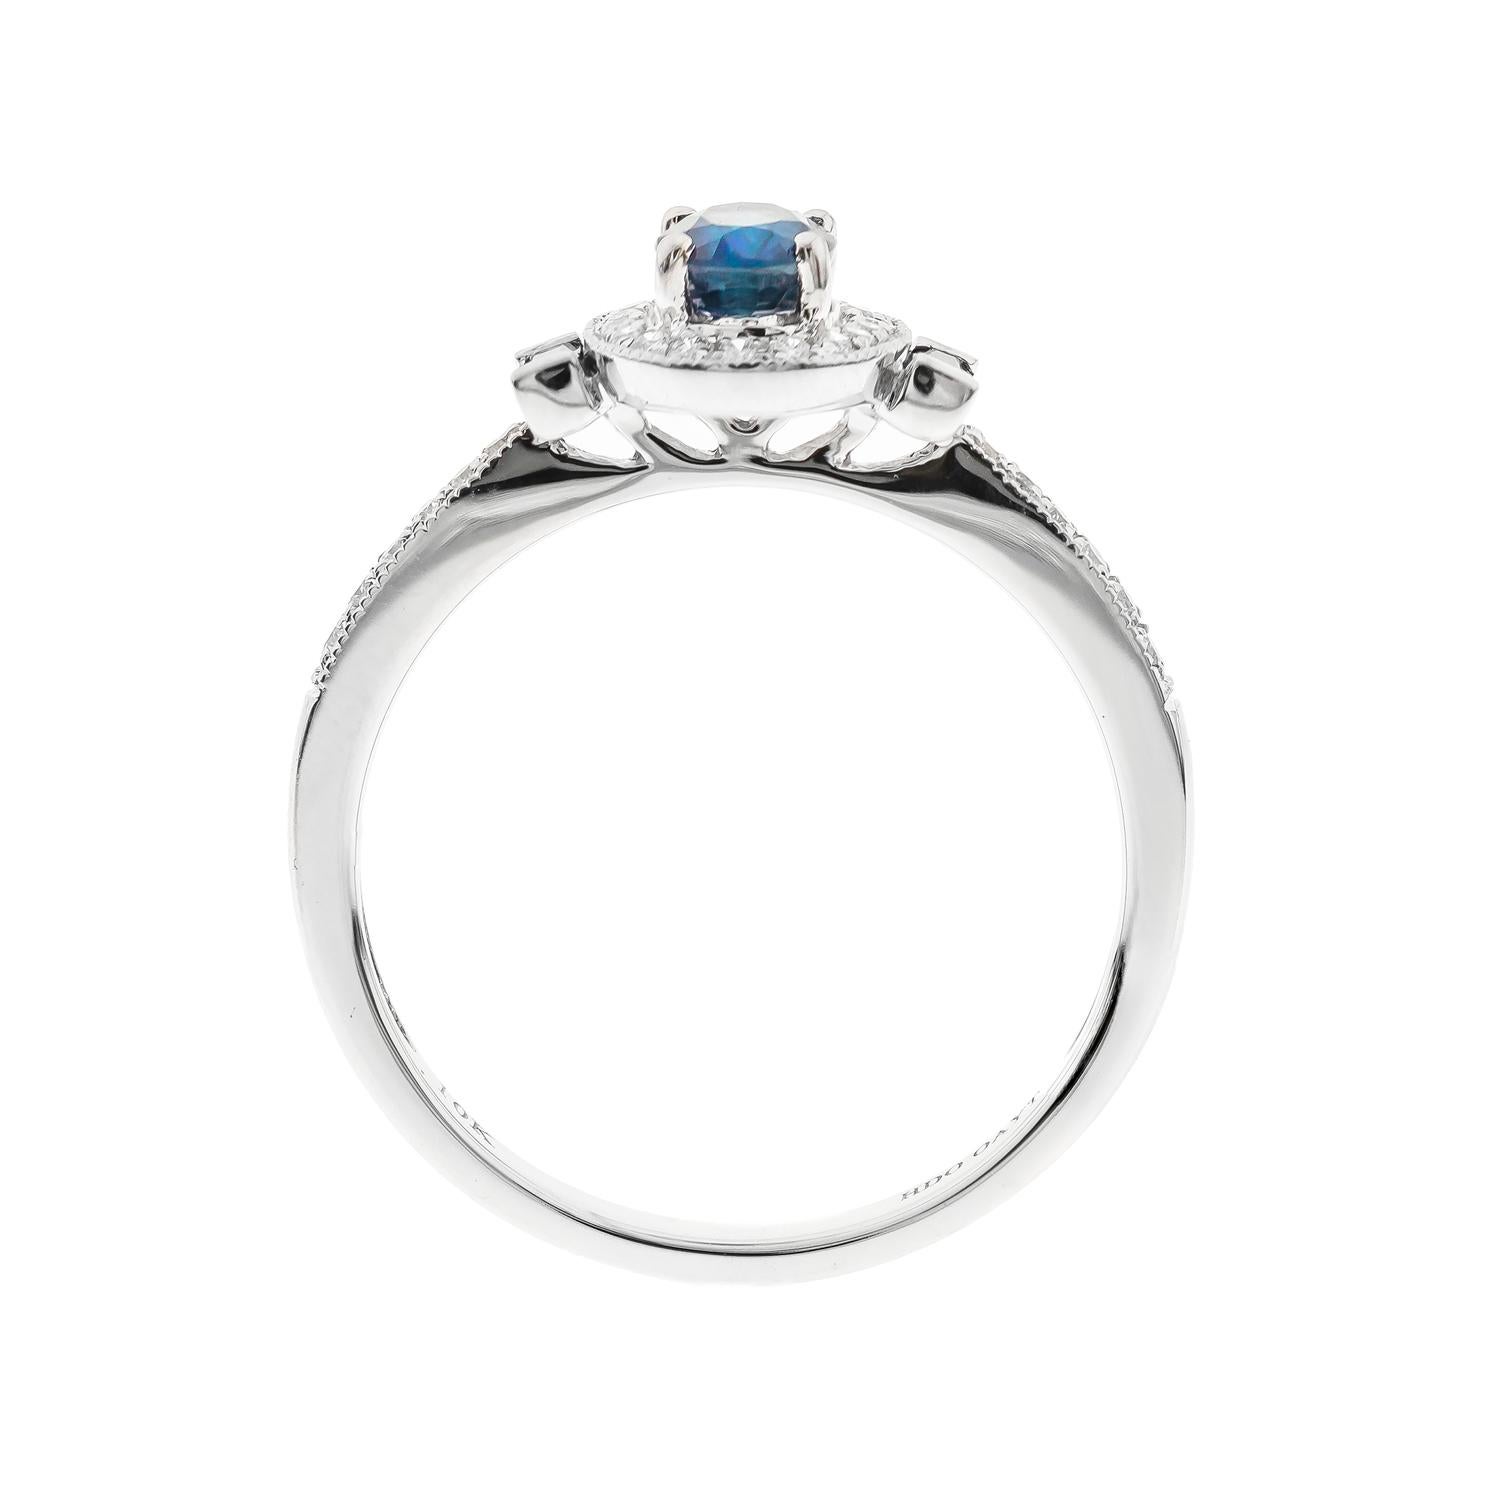 Stunning, timeless and classy eternity Unique Ring. Decorate yourself in luxury with this Gin & Grace Ring. The 10K White Gold jewelry boasts with Oval-cut 1 pcs 0.64 carat, Baguette-cut 2 pcs 0.15 carat Blue Sapphire and Natural Round-cut white